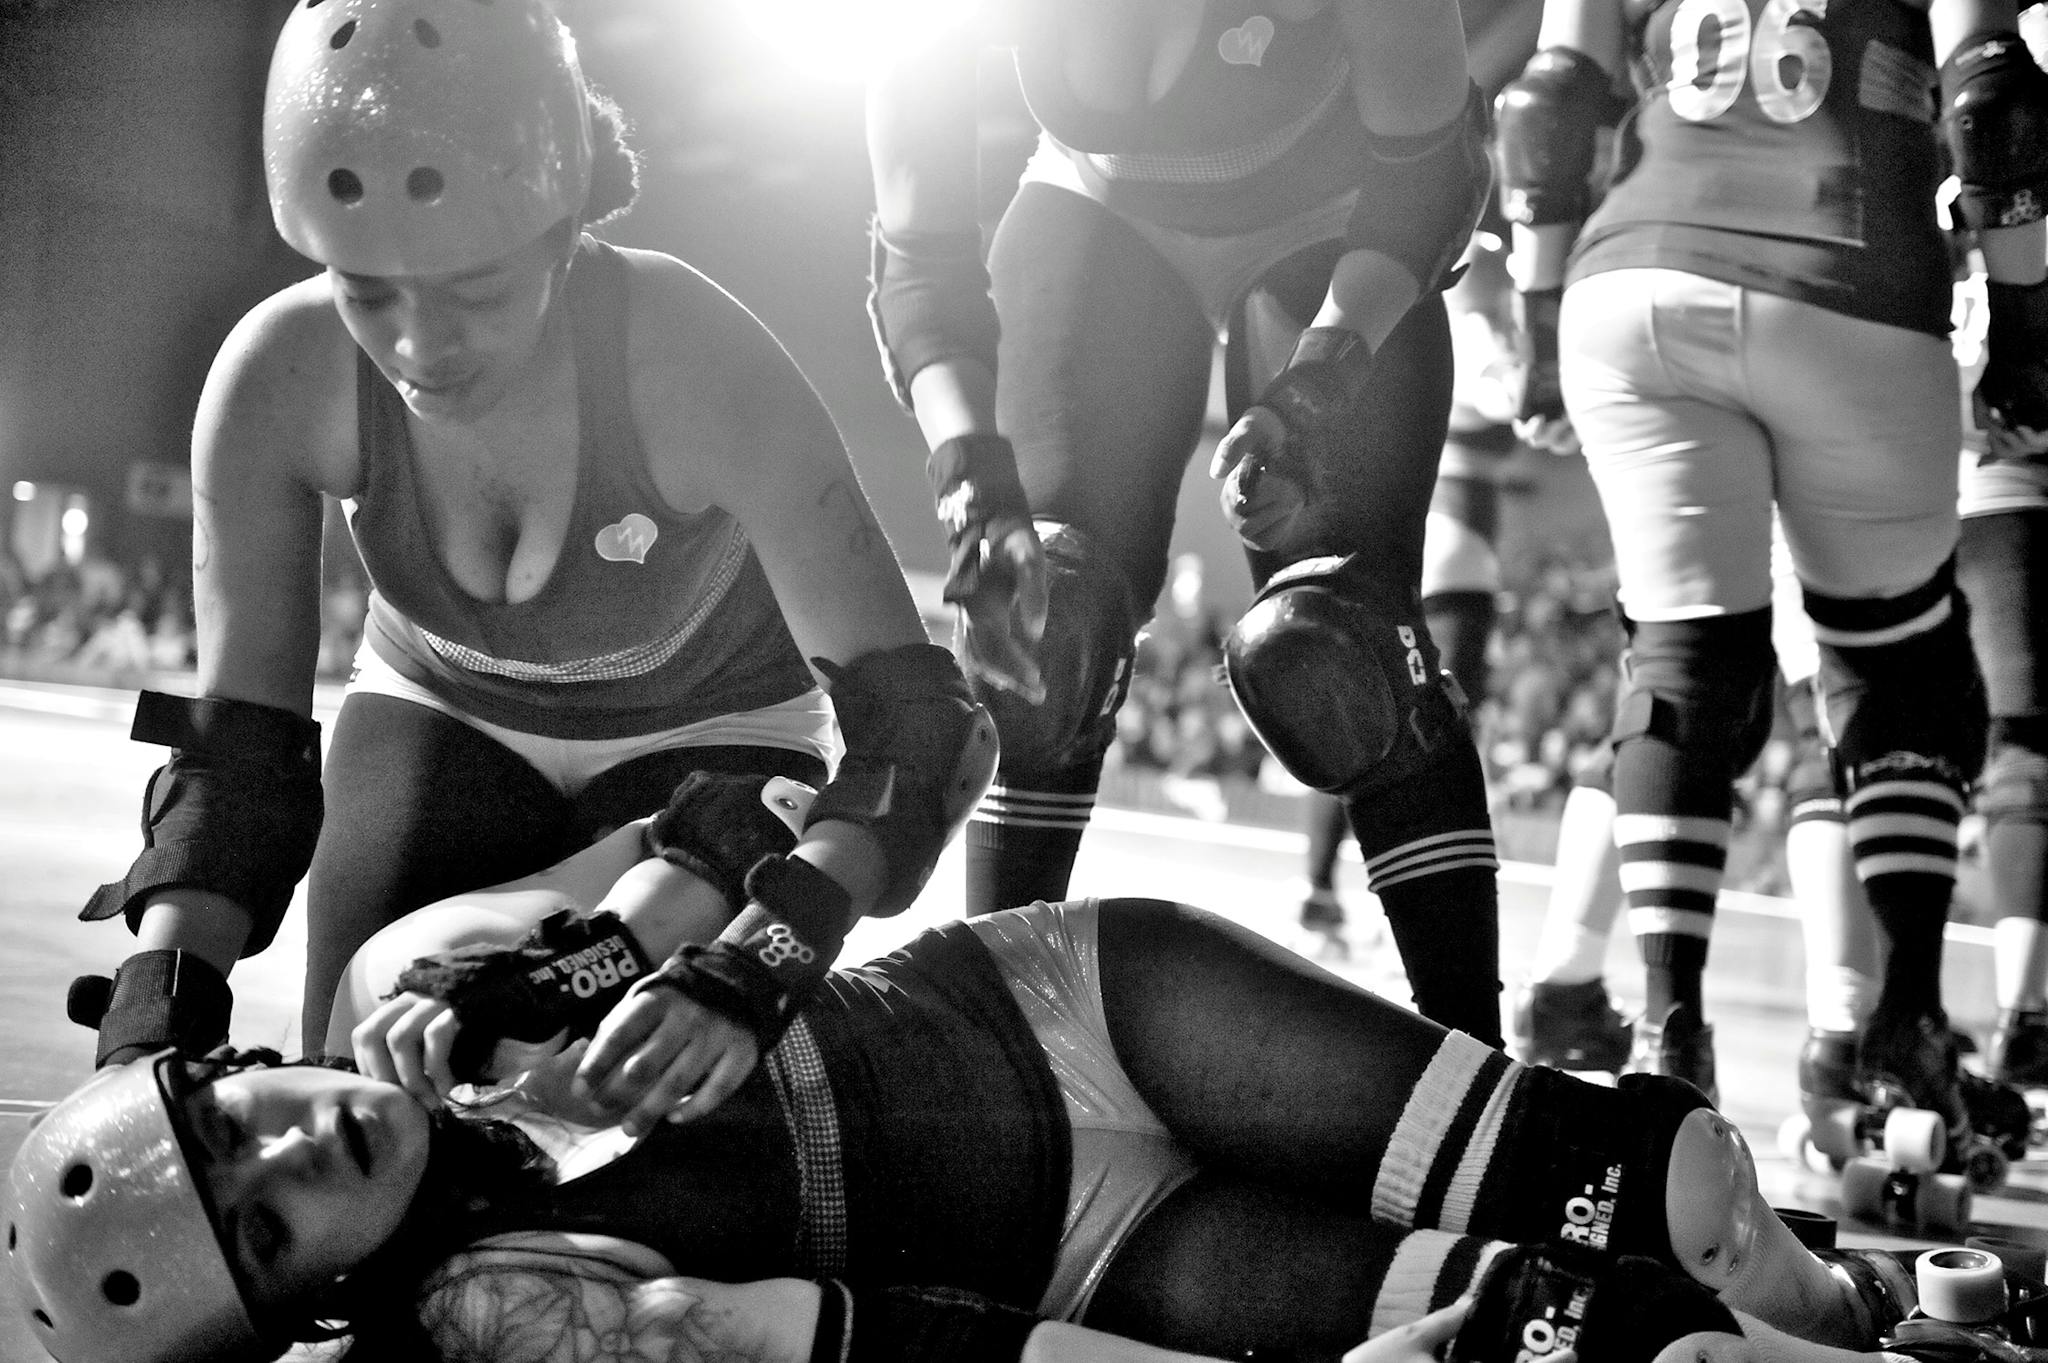 Ruby Wring and Rita Menweep at a roller derby track.